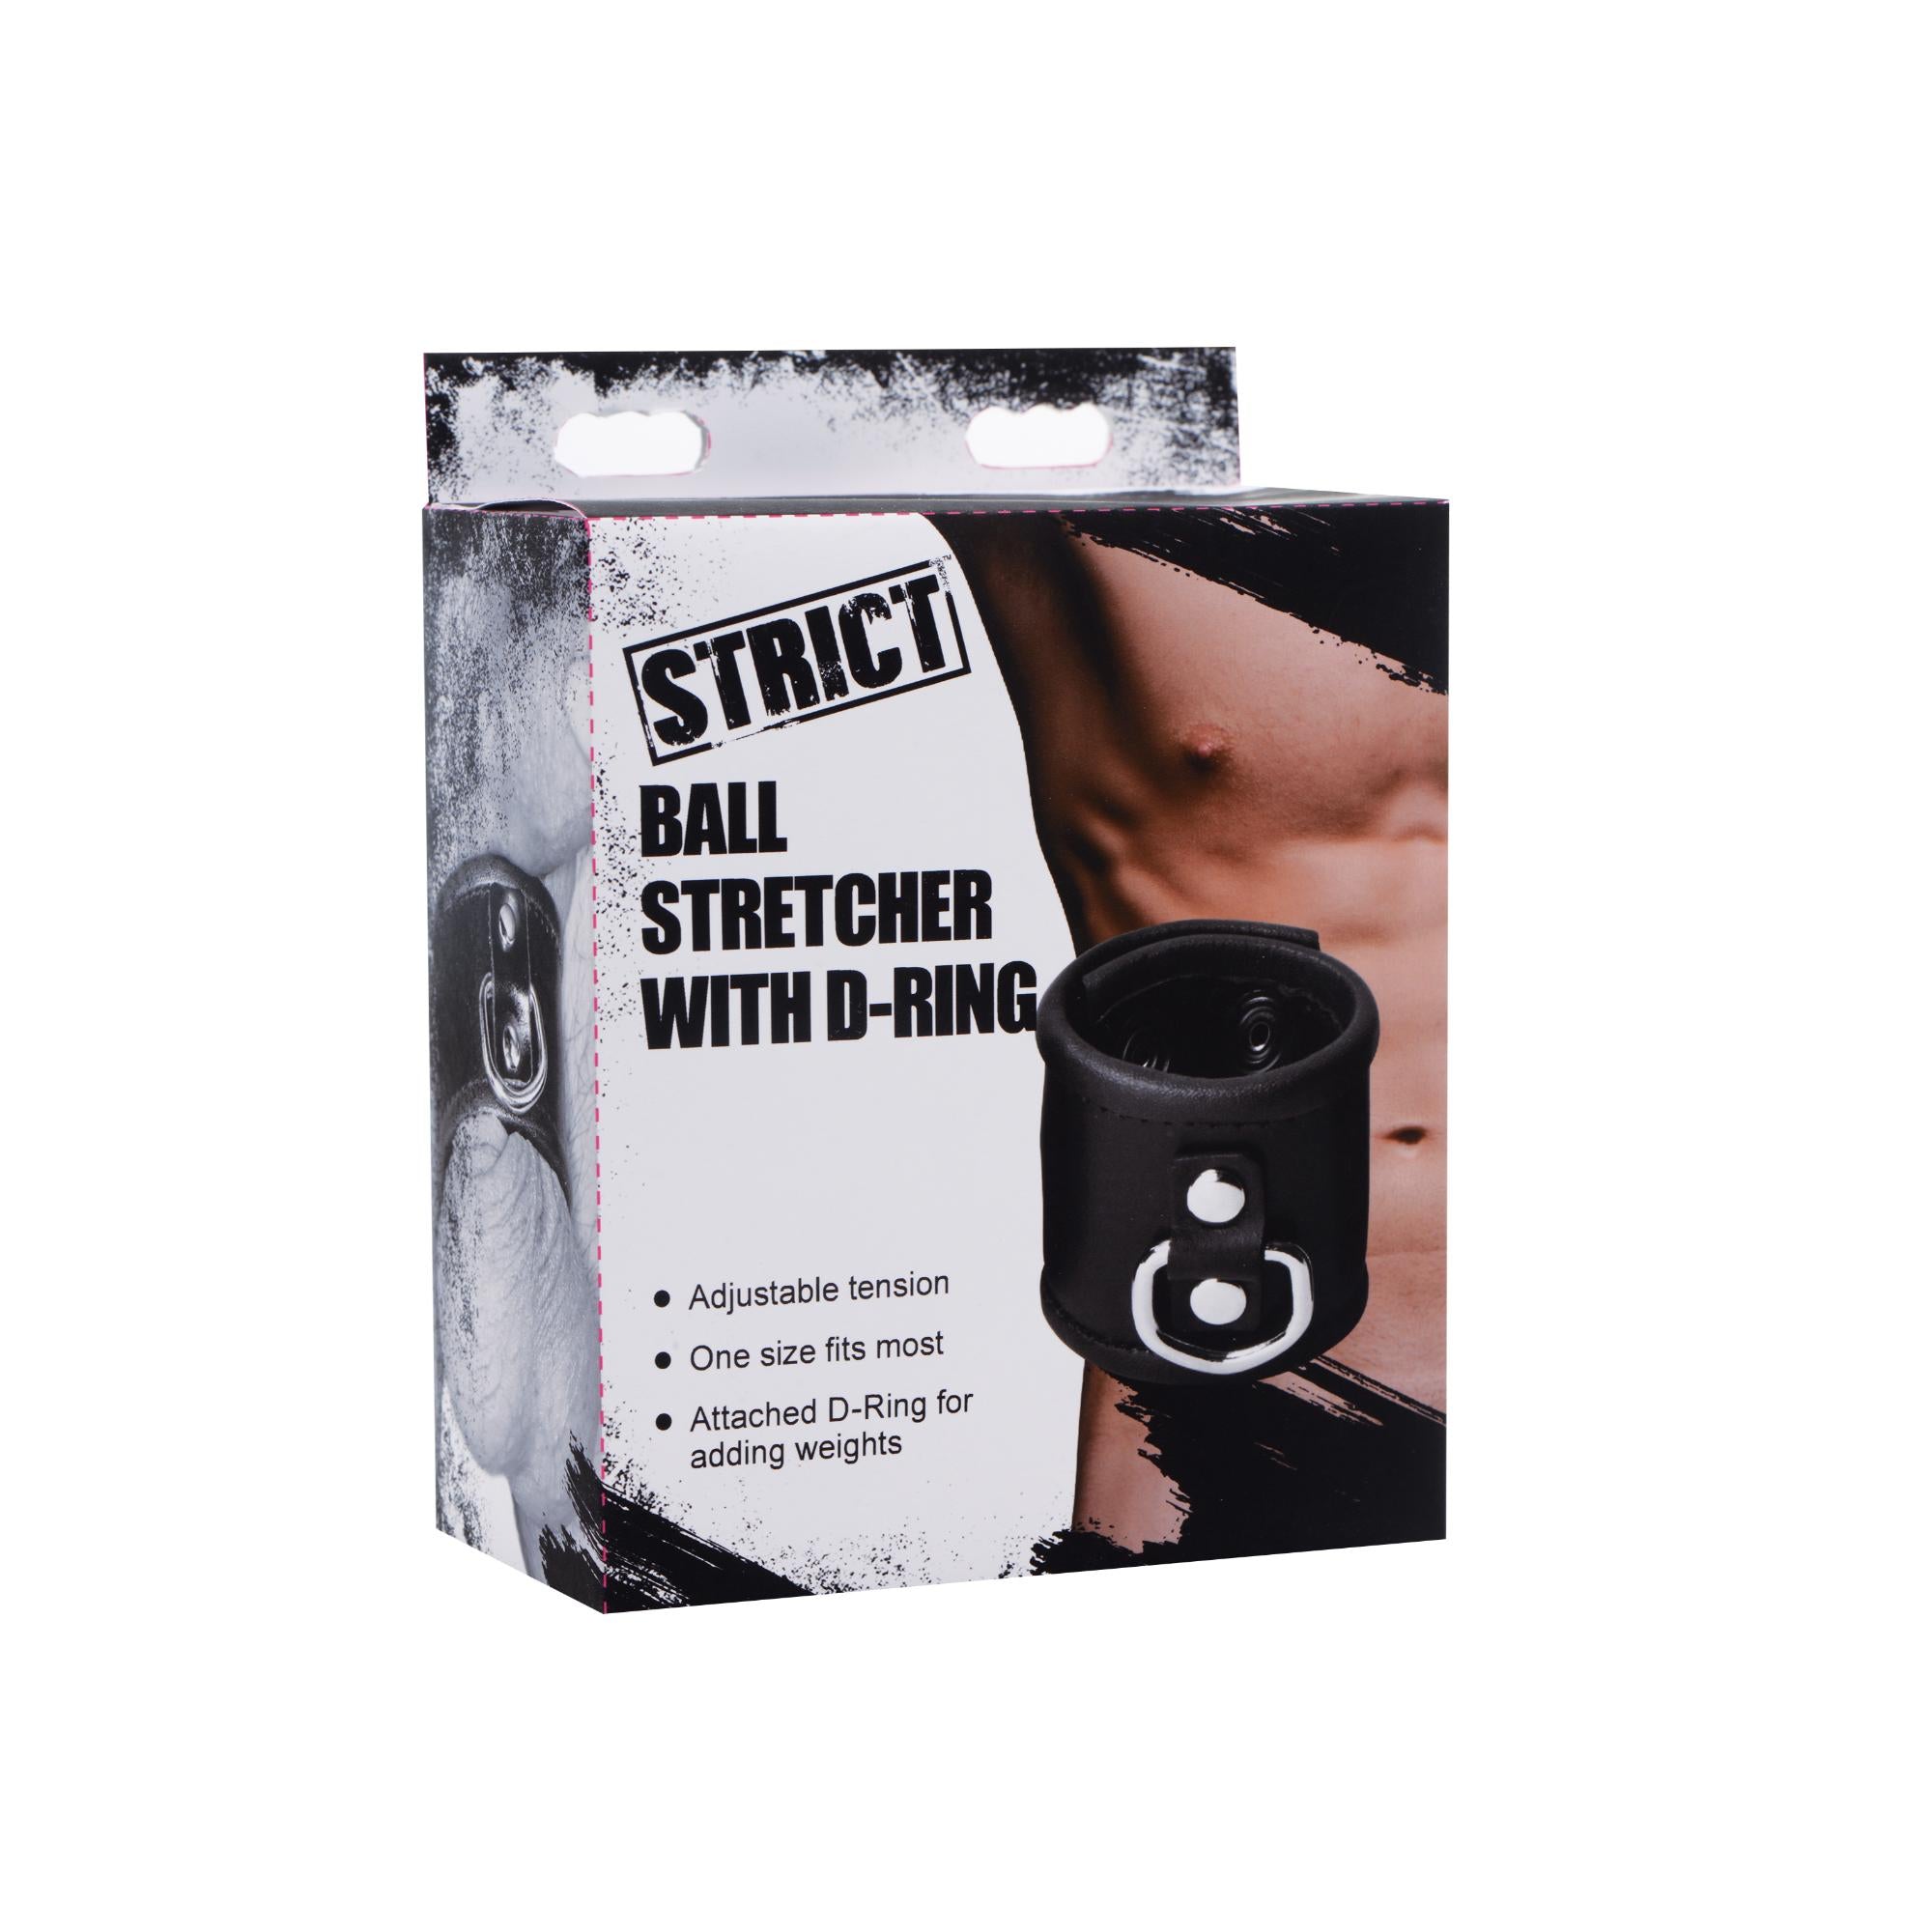 STRICT Ball Stretcher with D-Ring